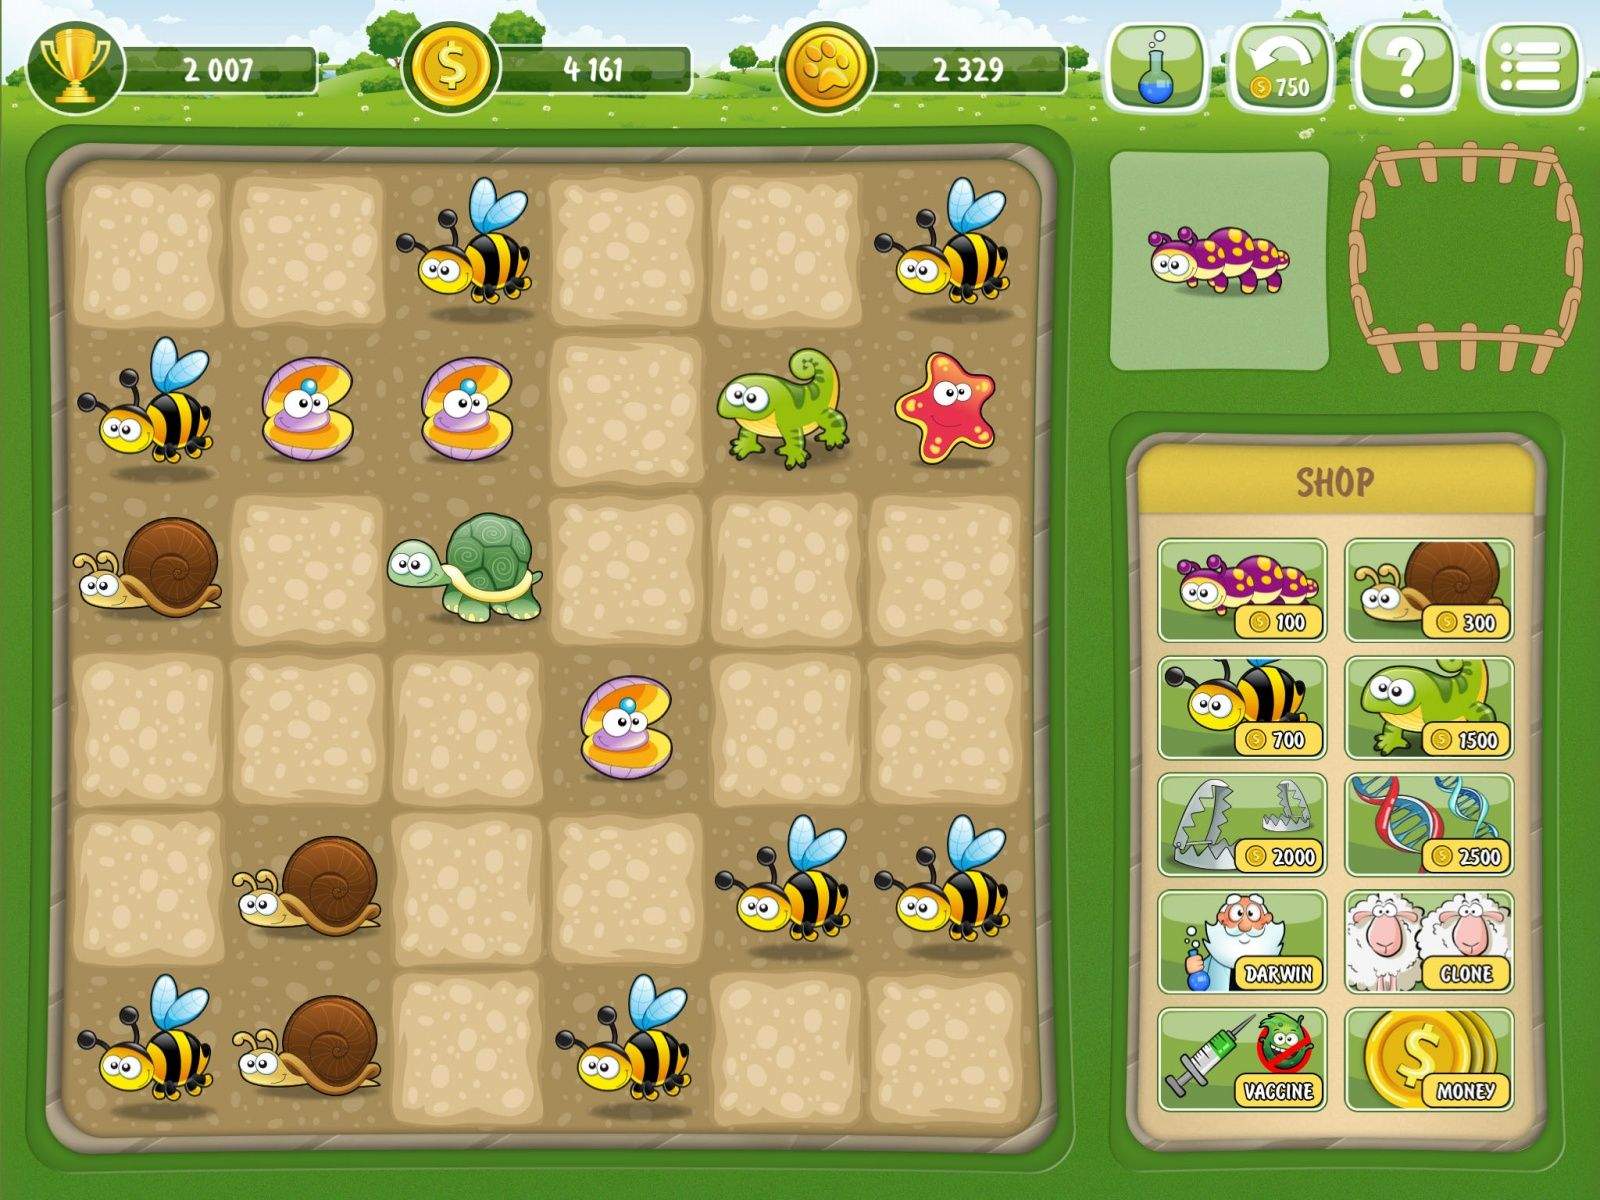 You can't move pieces around on the board which makes connecting speciality animals difficult.